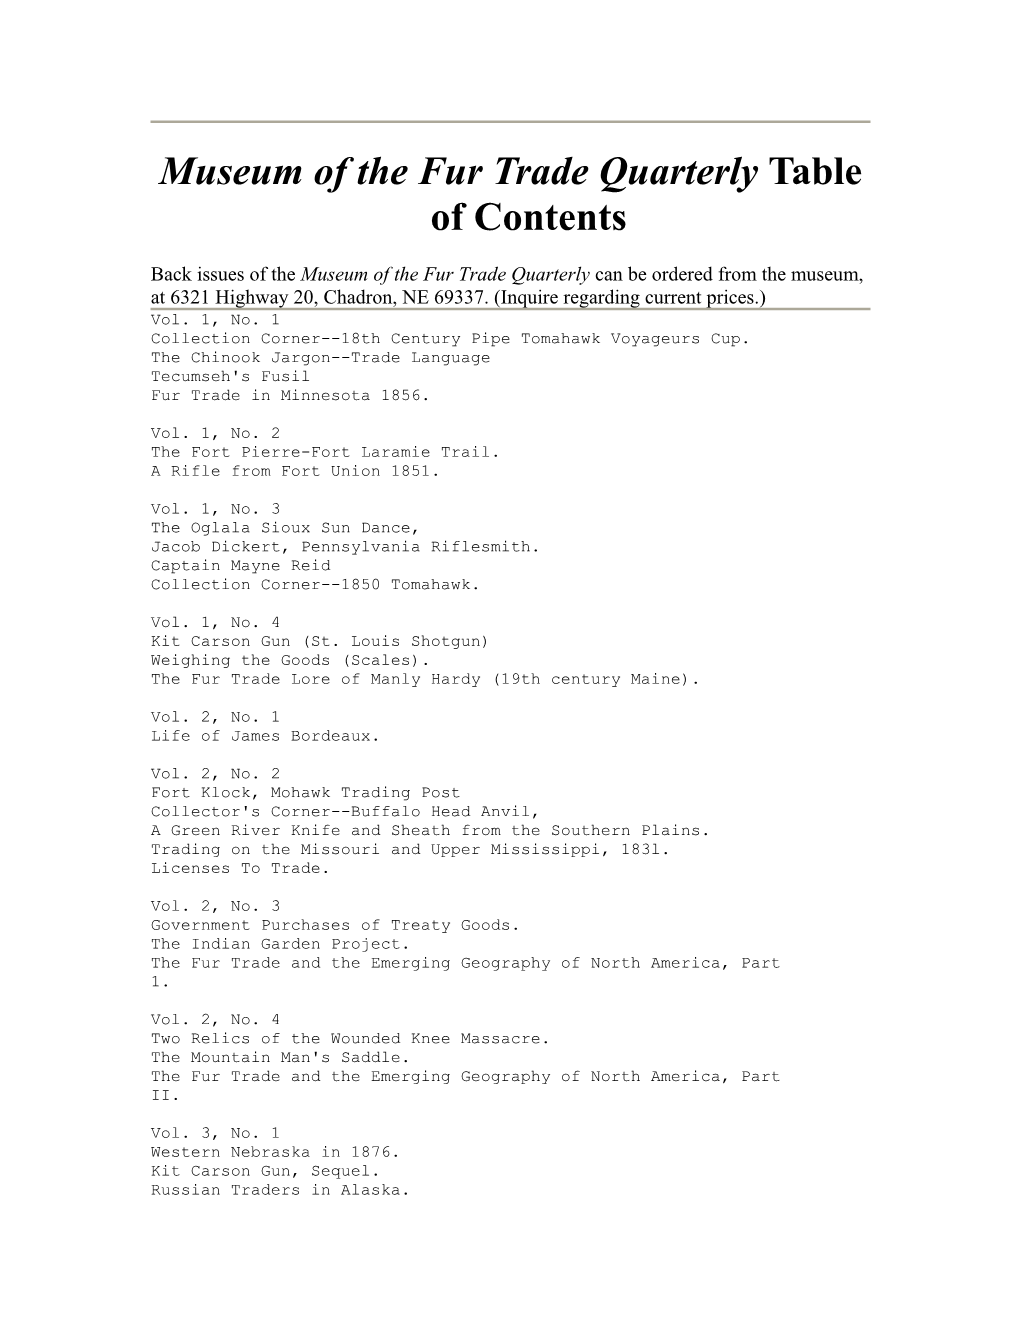 Museum of the Fur Trade Quarterly Table of Contents